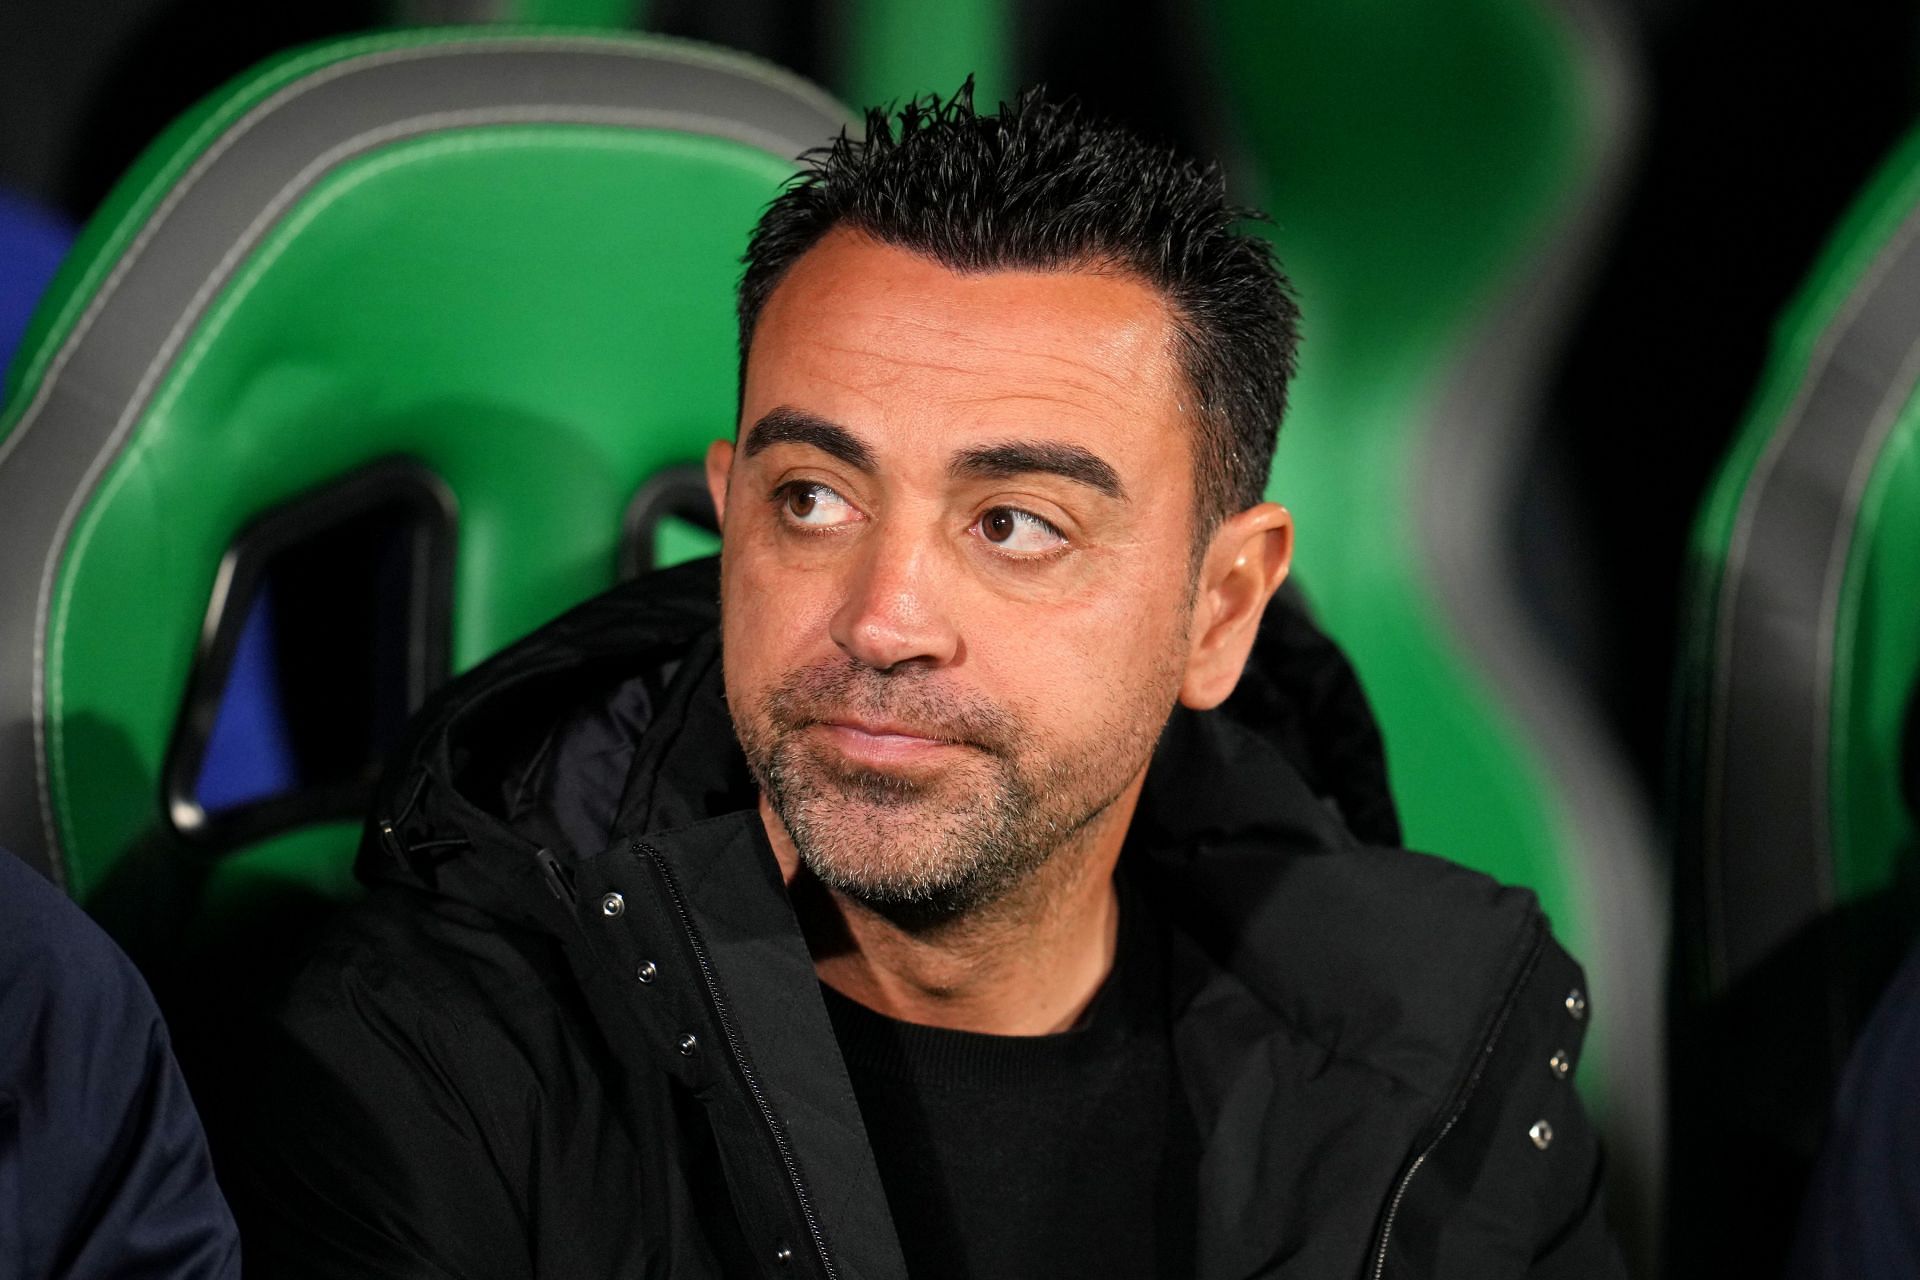 xavi-asks-barcelona-to-make-extra-efforts-to-sign-2022-fifa-world-cup-winner-this-summer-reports